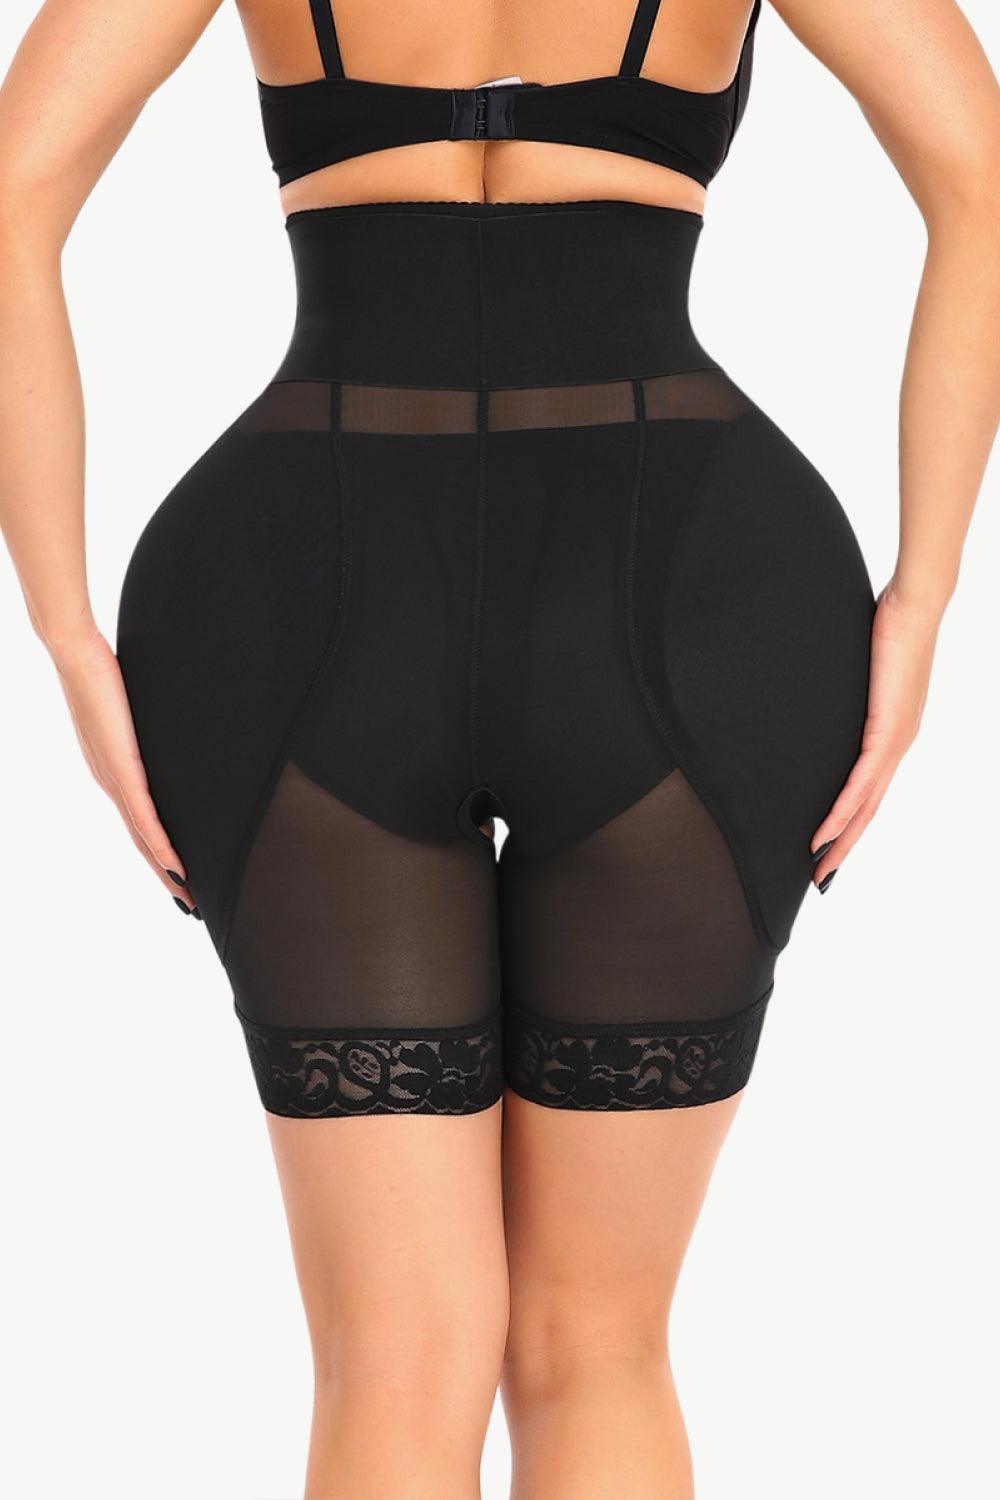 Breathable Lace Trim Hip Lifter Shaping Shorts - MXSTUDIO.COM